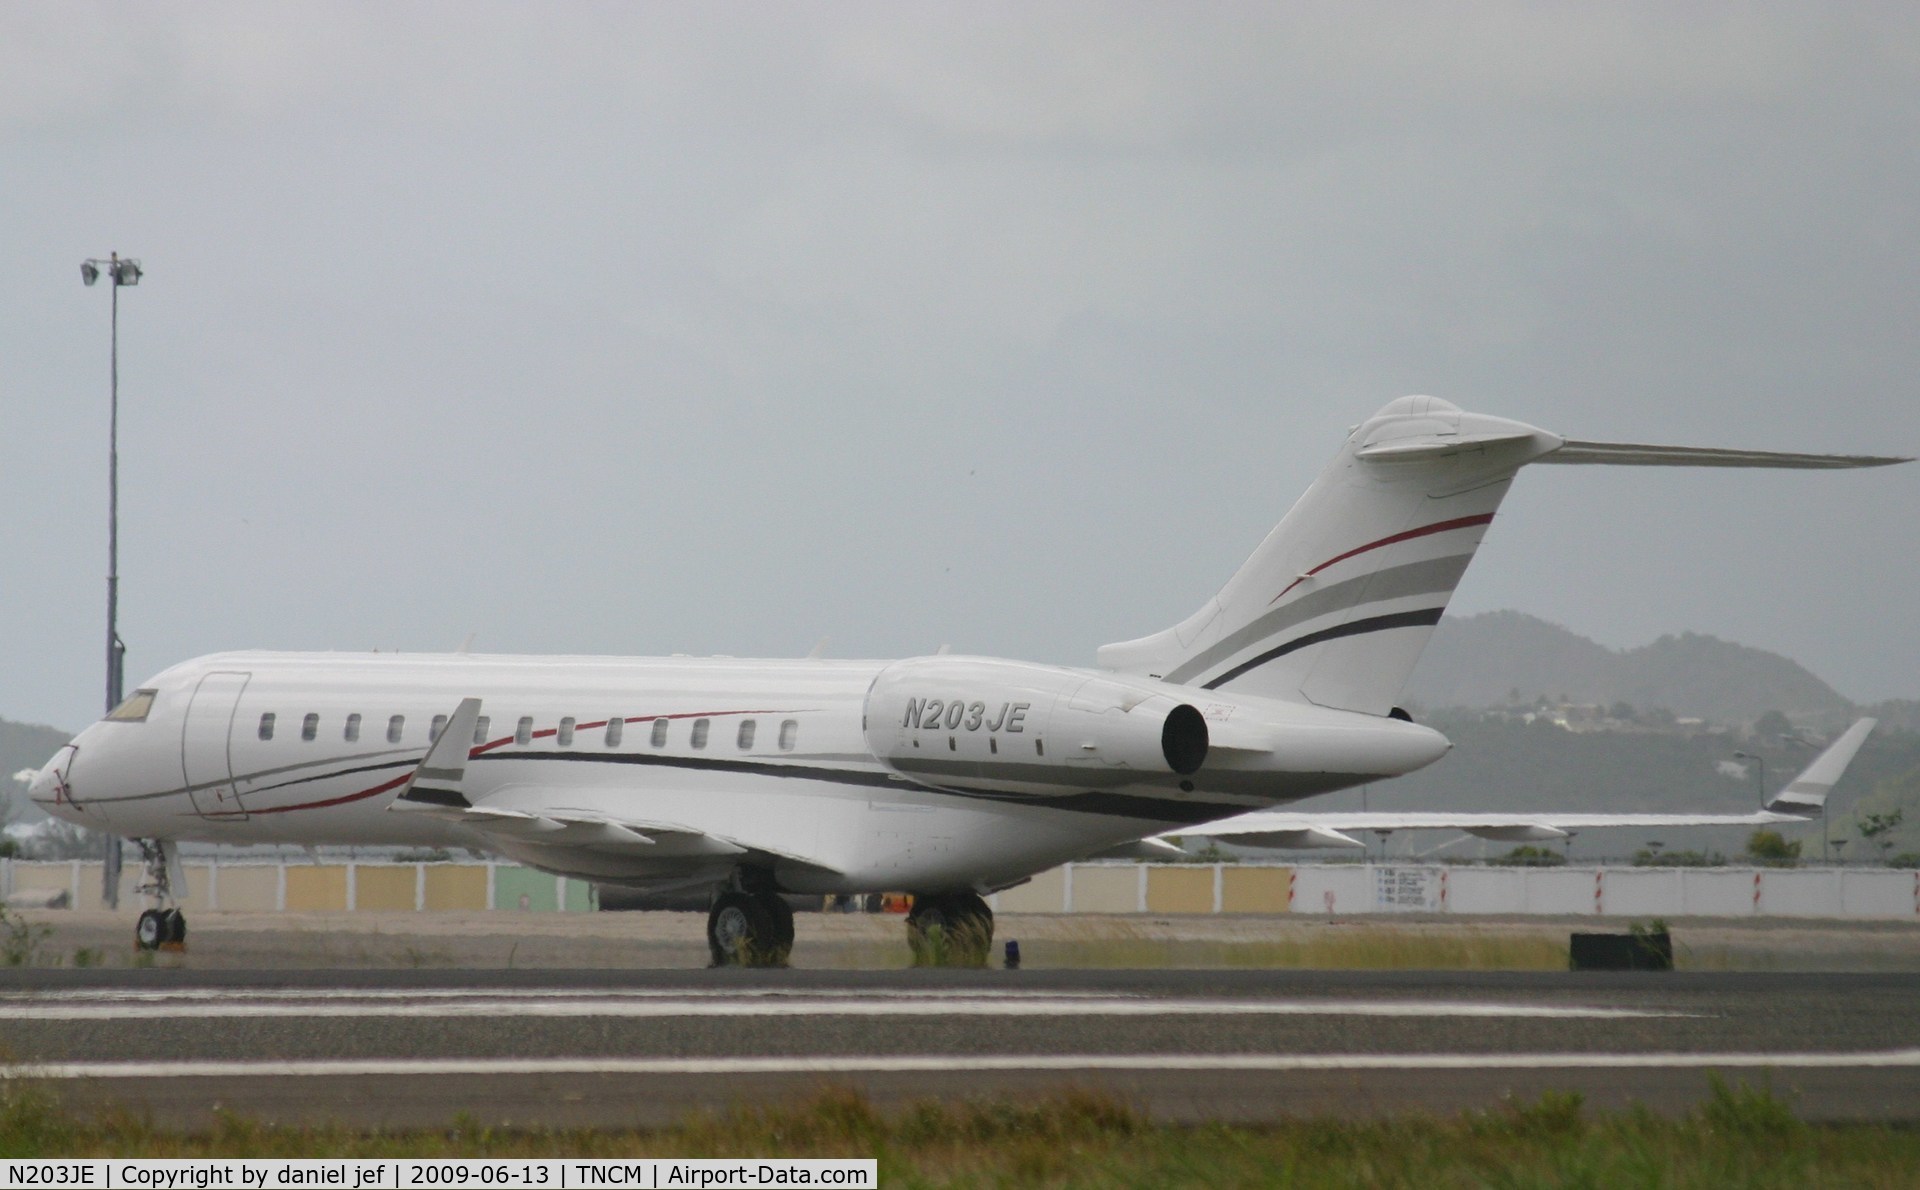 N203JE, 1999 Bombardier BD-700-1A11 Global 5000 C/N 9019, park at the ramp